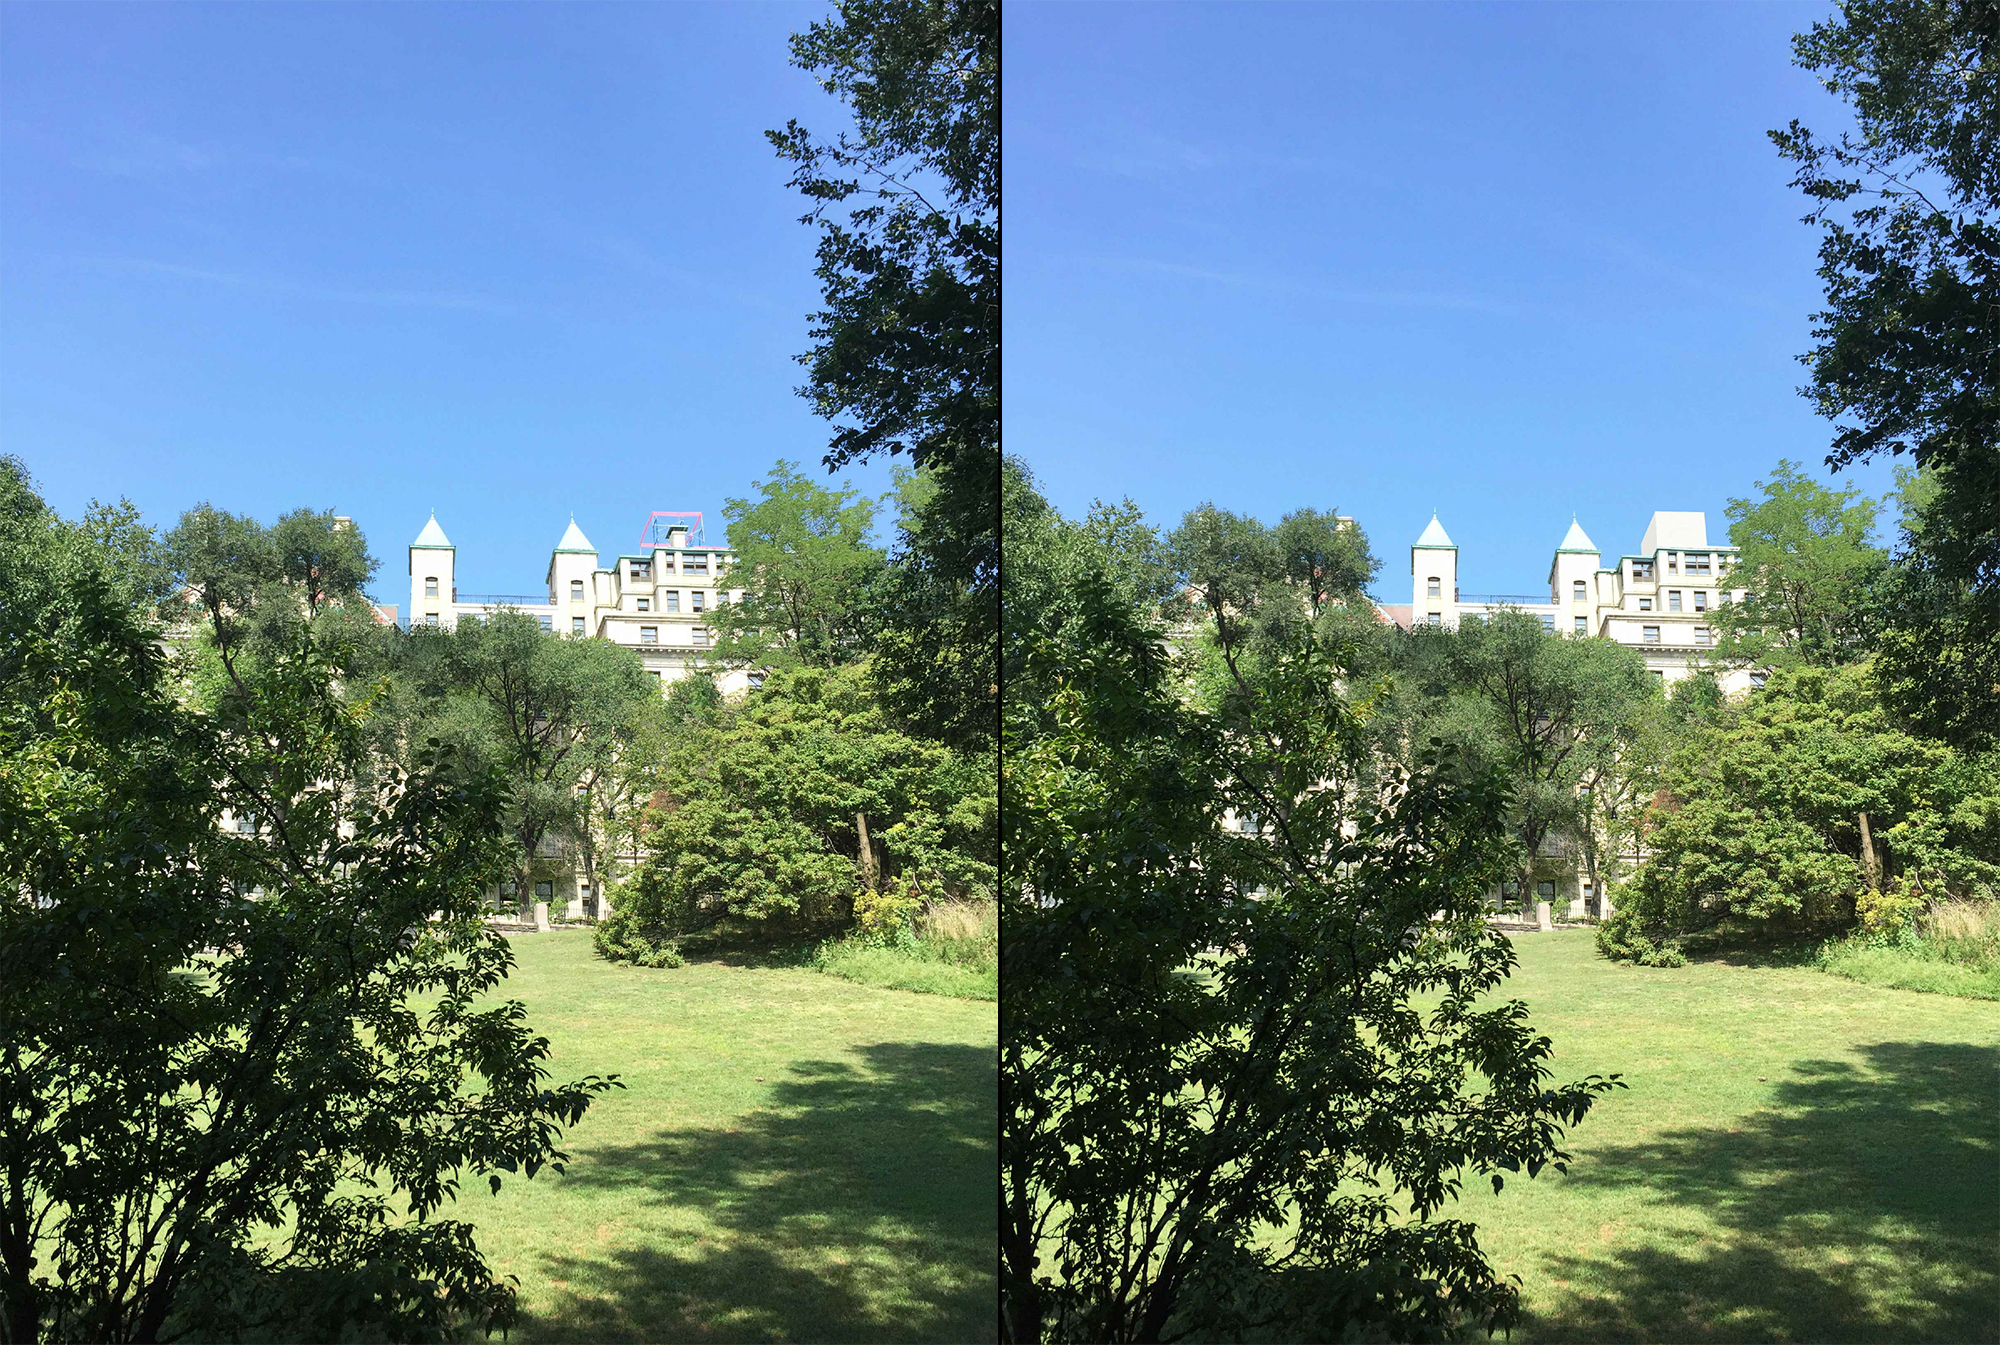 Existing conditions at 30 Morningside Drive as seen from Morningside Park (left) and rendered with bulkhead (right)